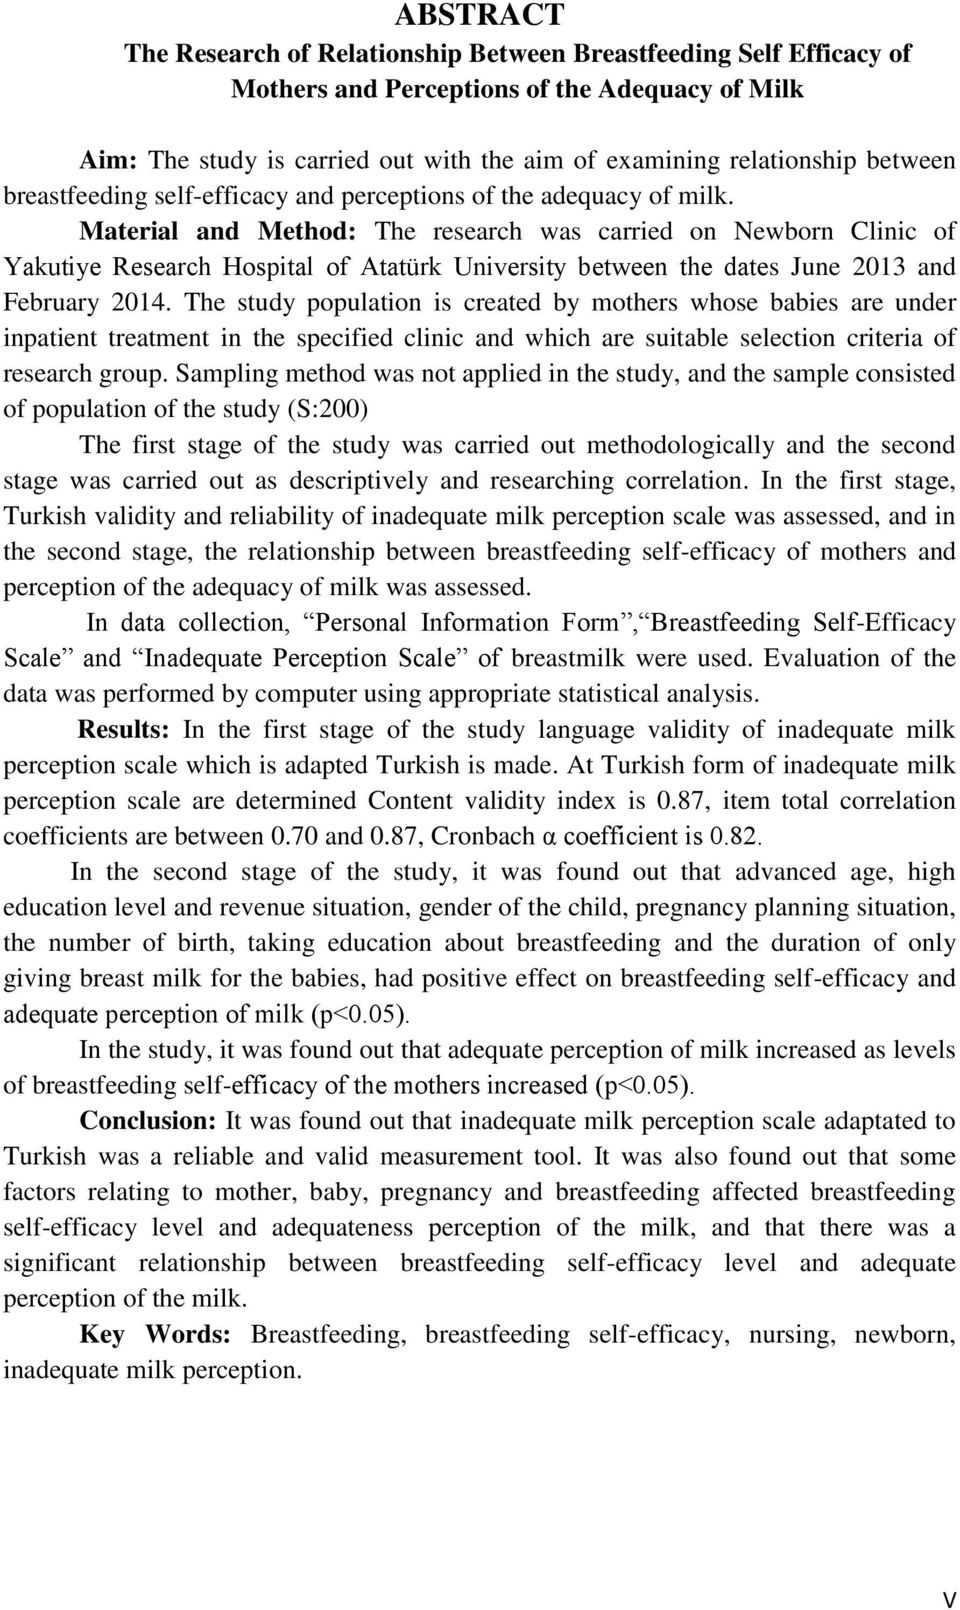 Material and Method: The research was carried on Newborn Clinic of Yakutiye Research Hospital of Atatürk University between the dates June 2013 and February 2014.